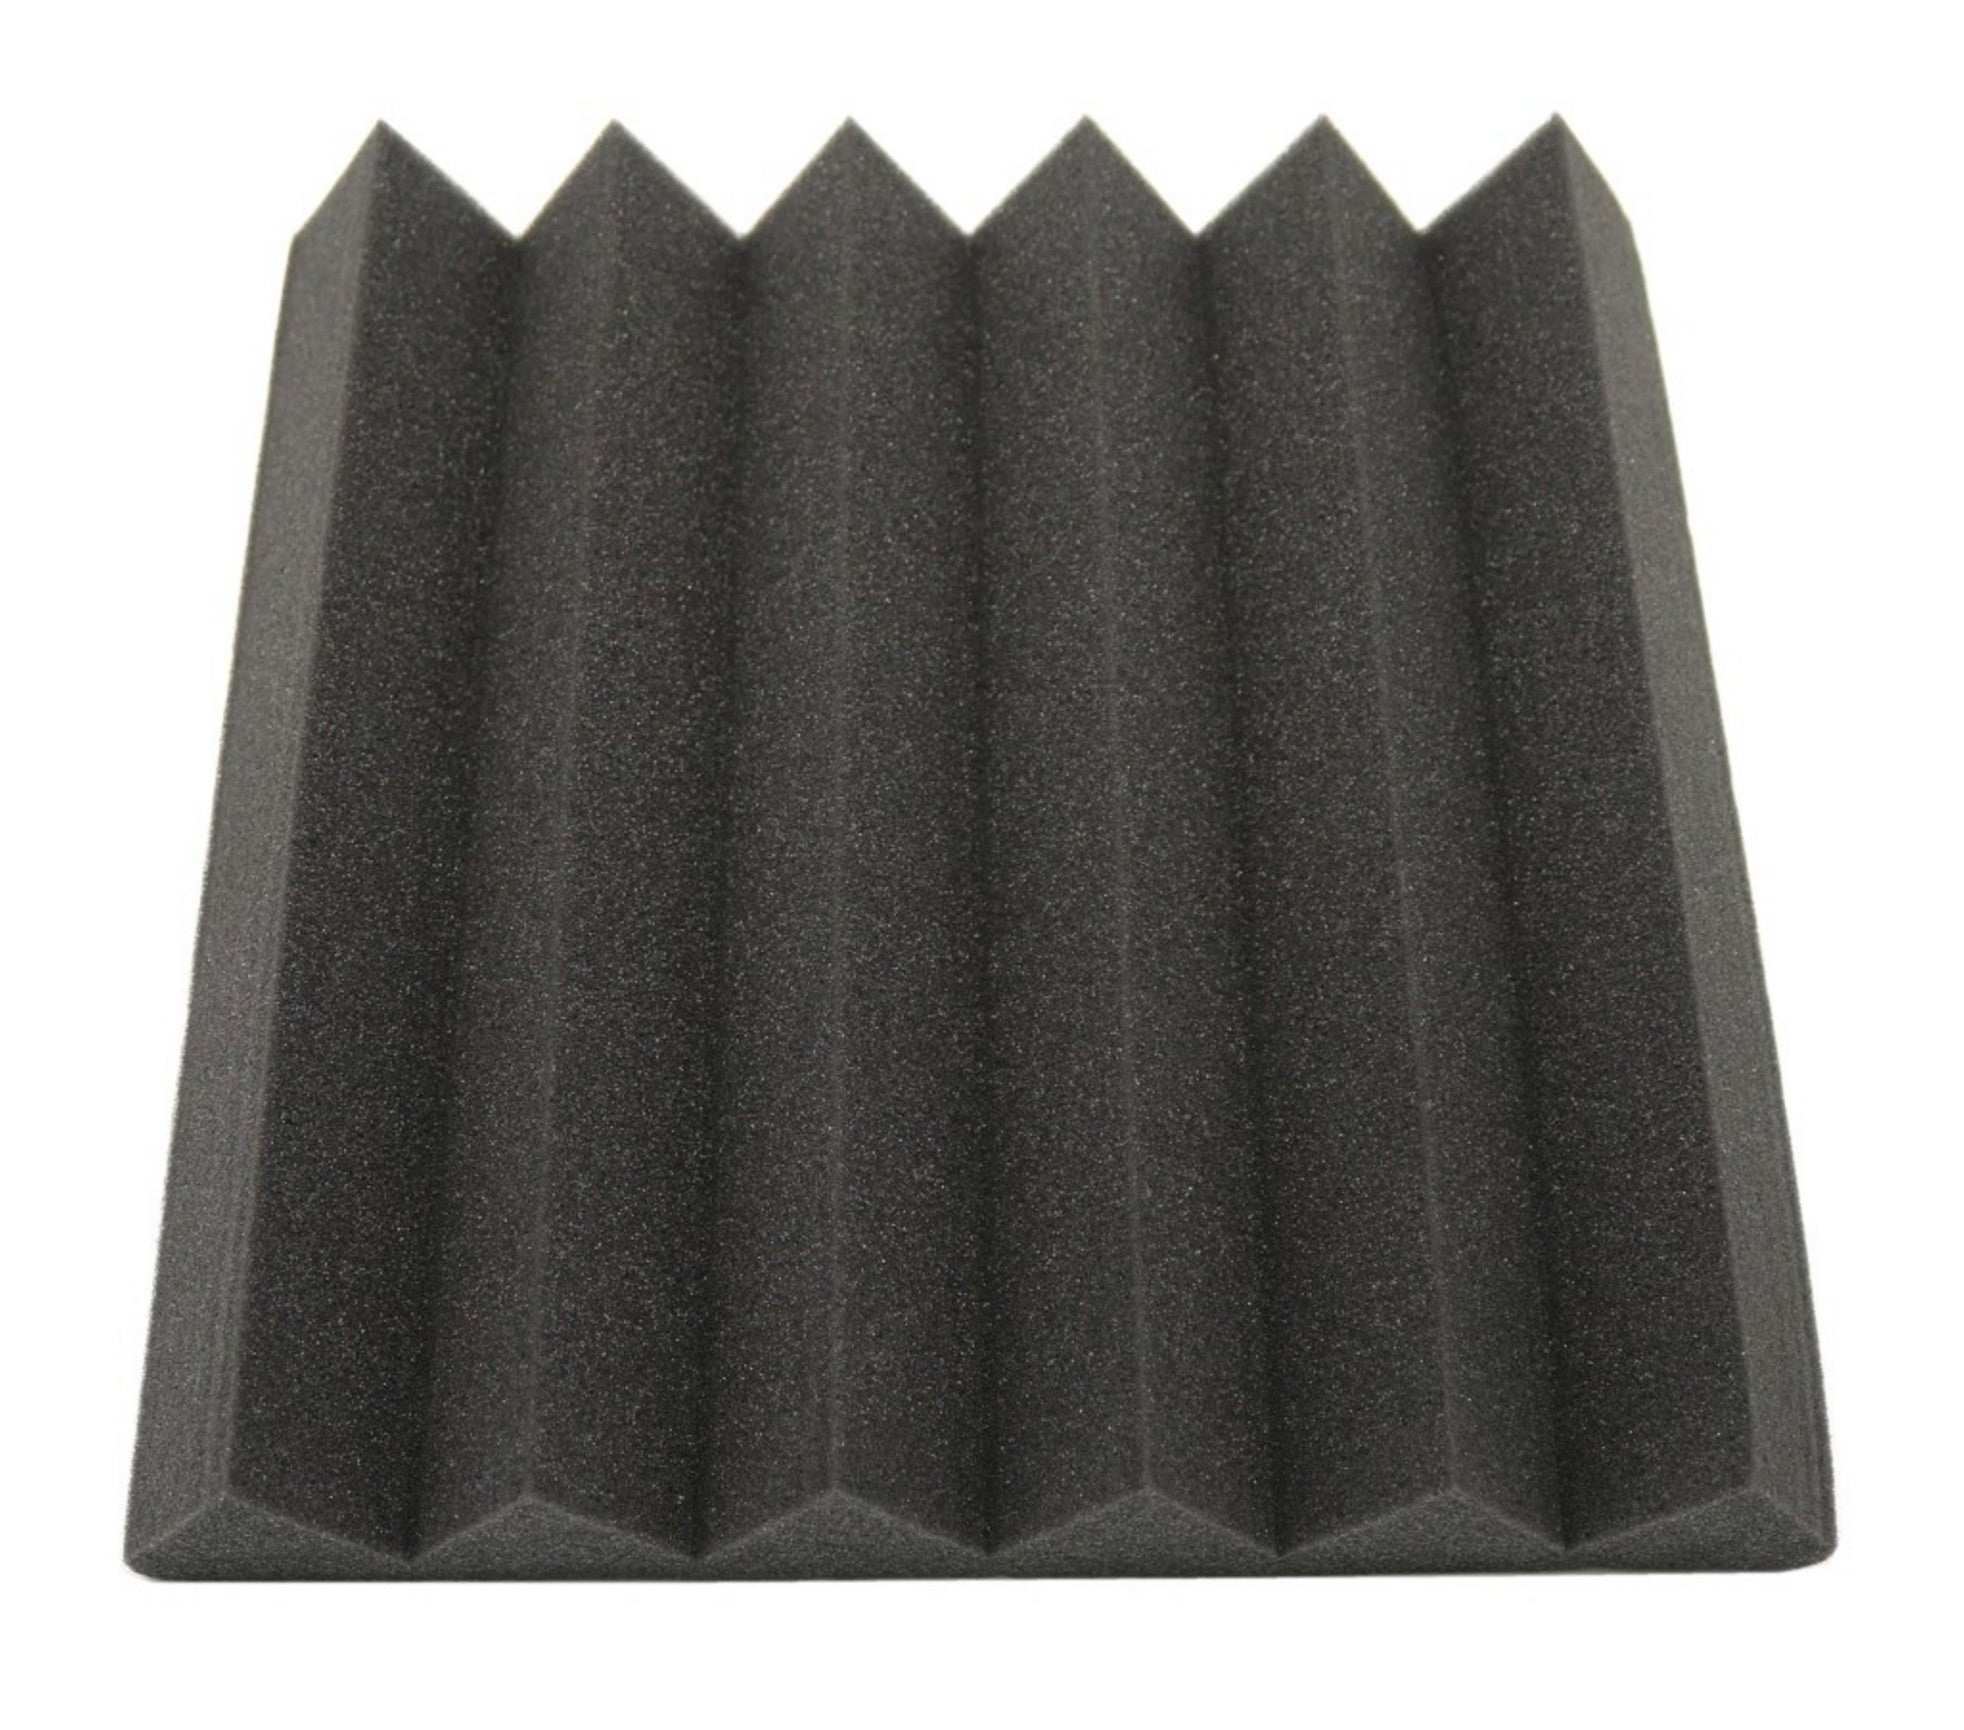 Triangle Soundproofing Wedges 2" (Various Colors & Quantities)